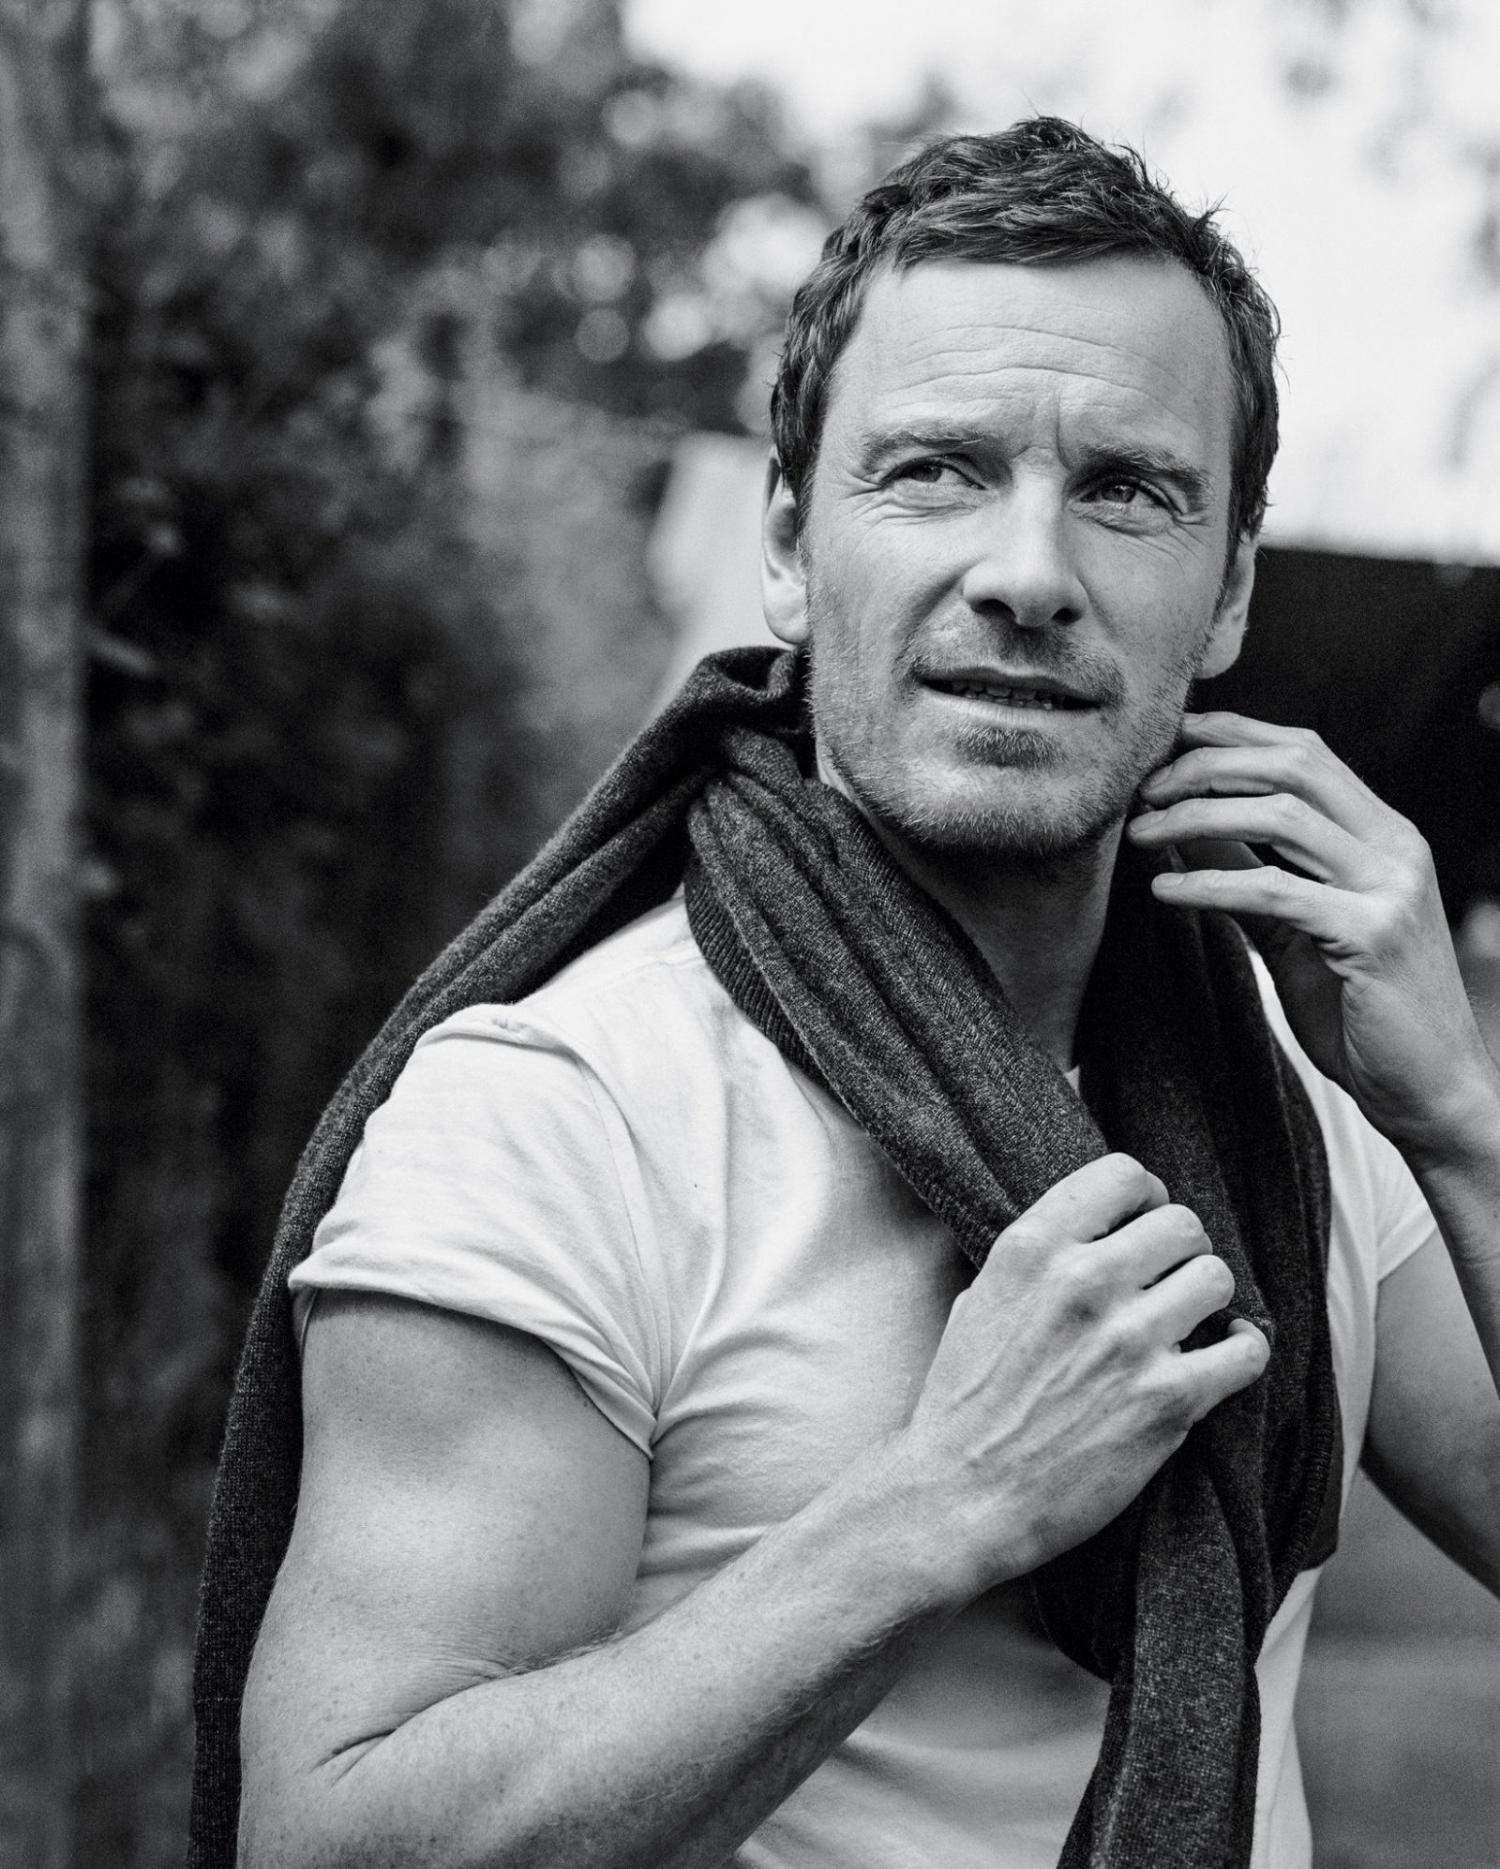 Michael Fassbender by Bruce Weber for The New York Times Style Magazine Fall 2015. Clothing: Louis Vuitton sweater; J. Crew T-shirt